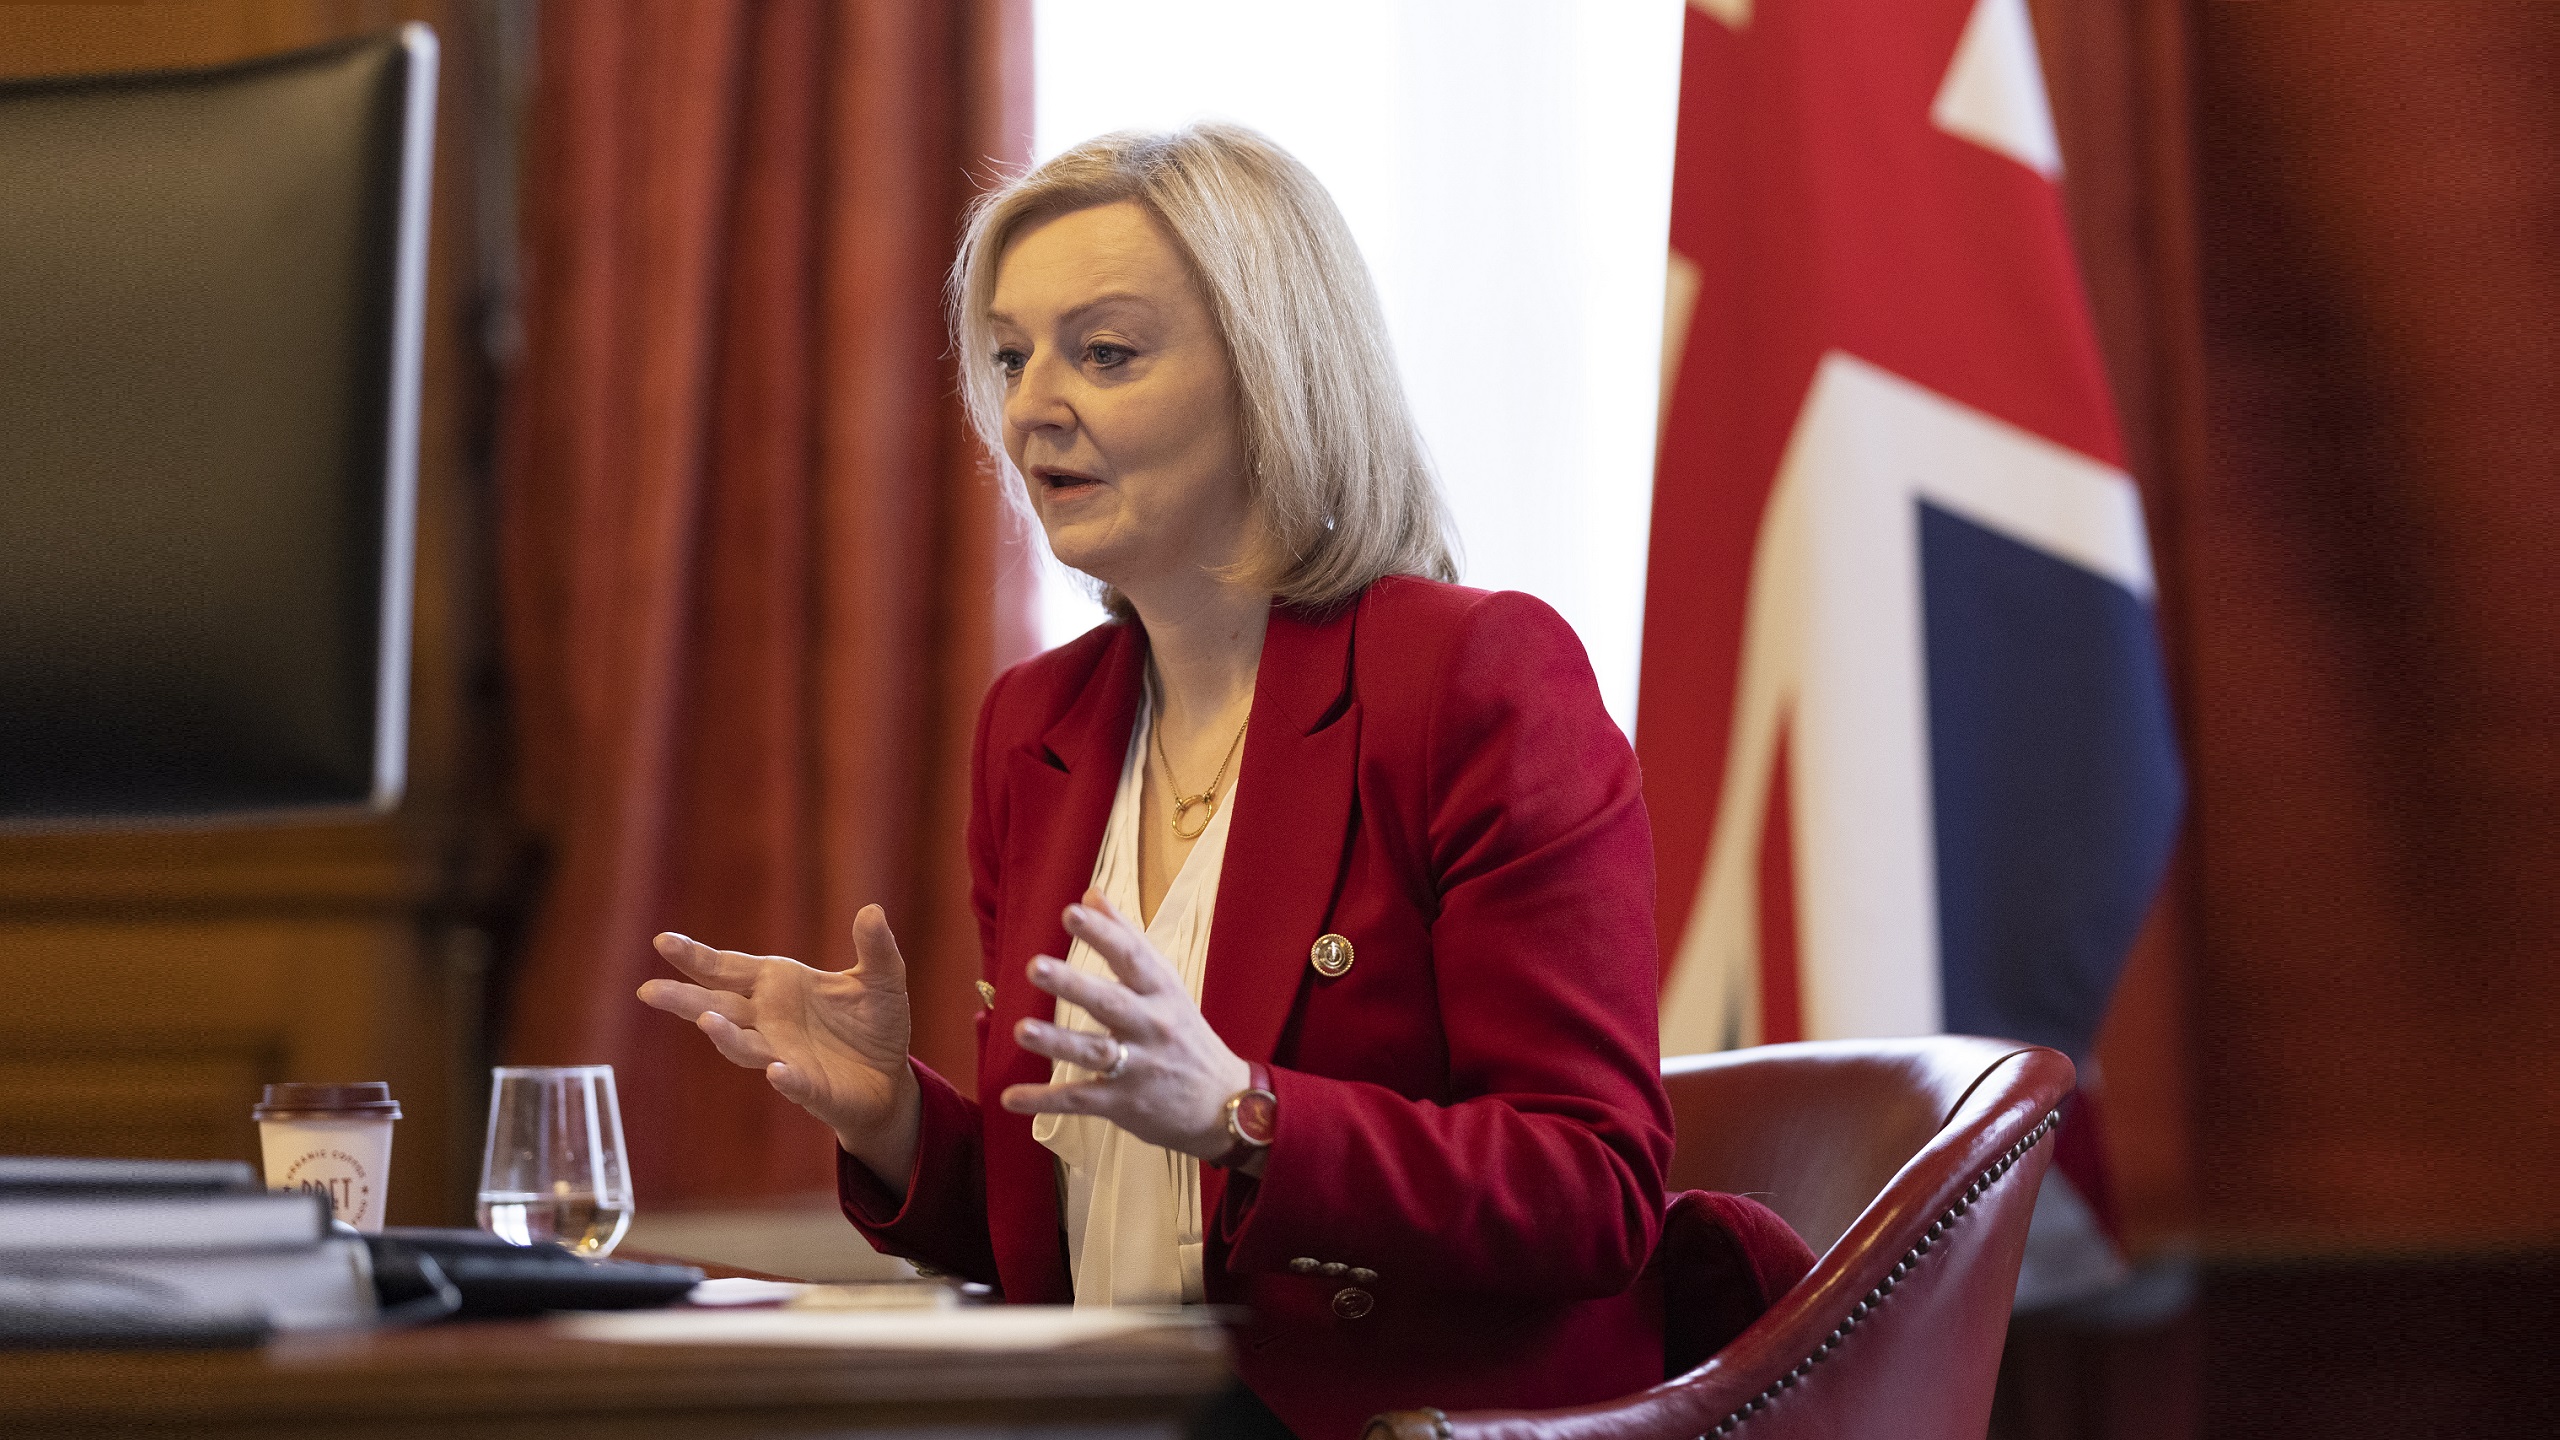 Liz Truss Elected Conservative Party Chief, Will Succeed Boris Johnson as PM